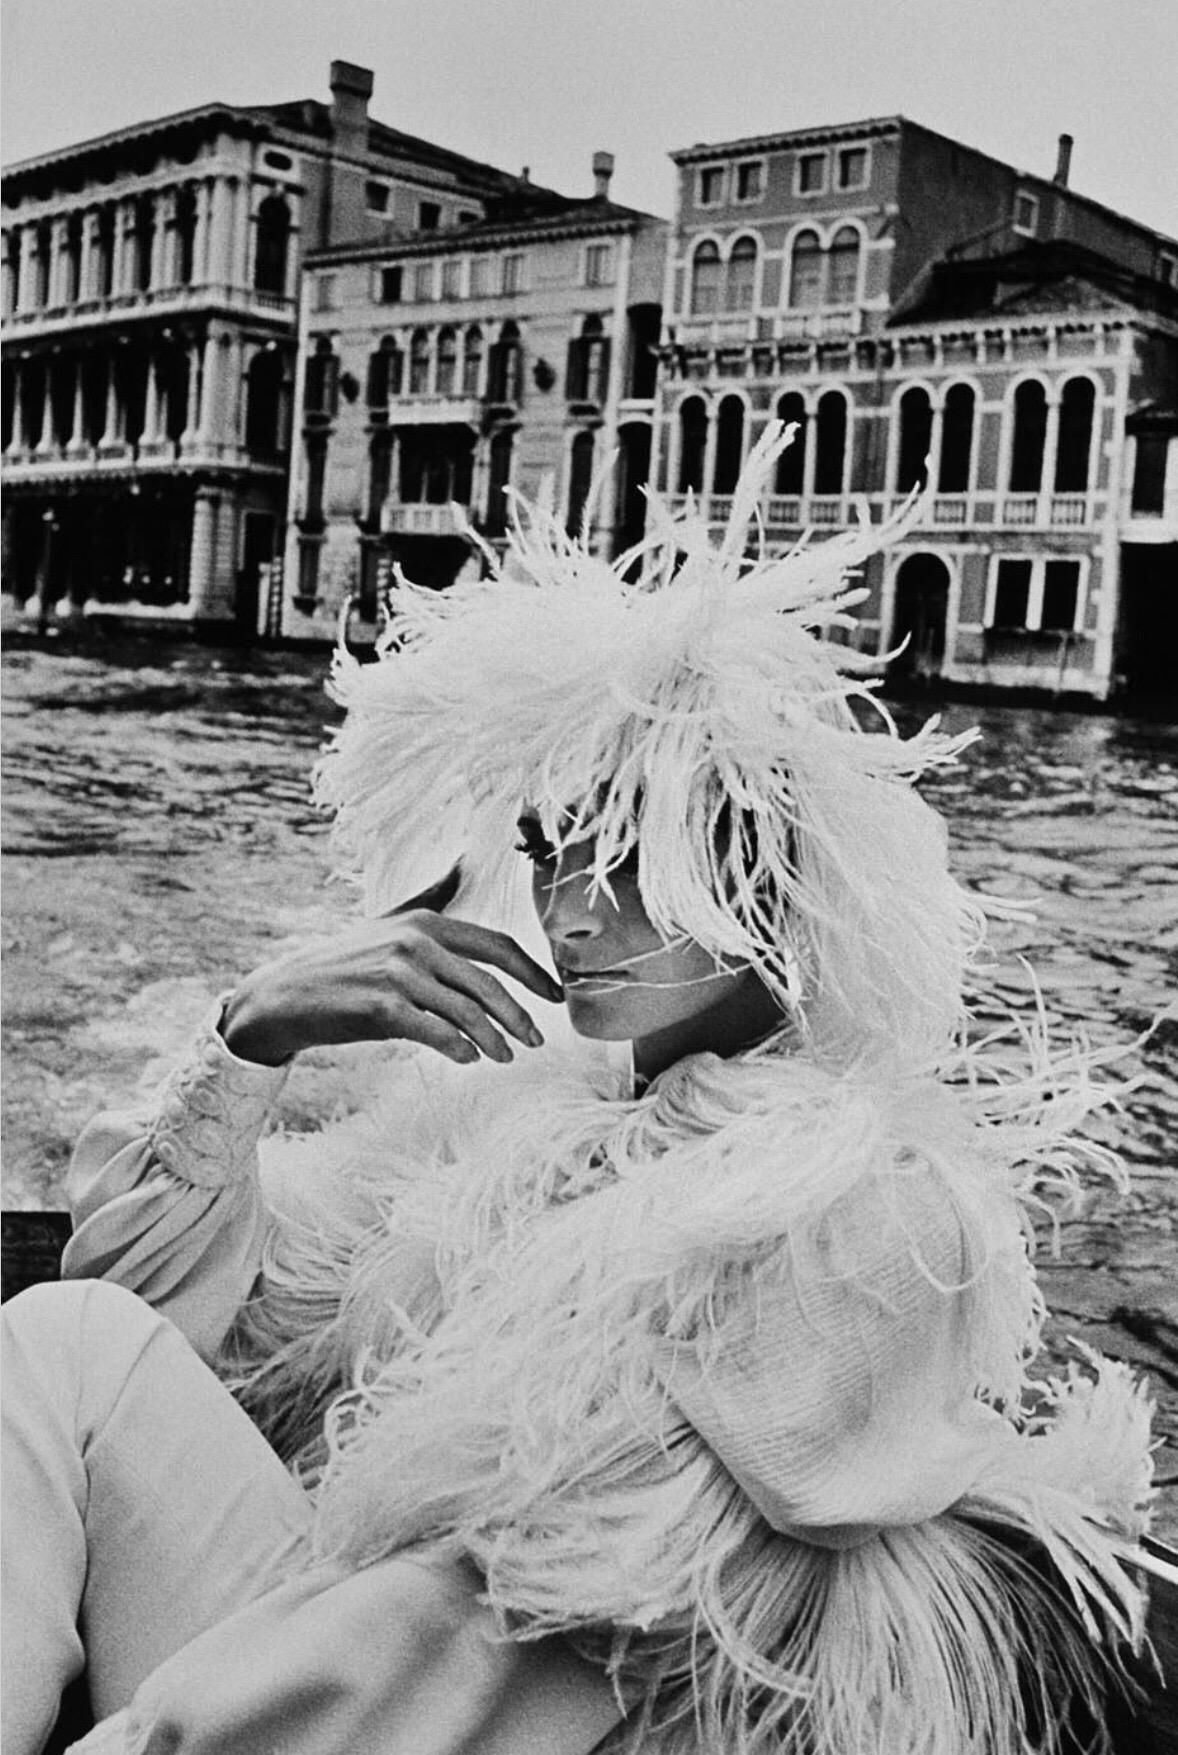 ‘Model in Venice’ is taken in a rare location for Newton: Venice. While its romanticism was a source of great inspiration for Newton, he only shot in the city on a handful of occasions, here for Queen Magazine in 1966 with clothes by Femme 90- an